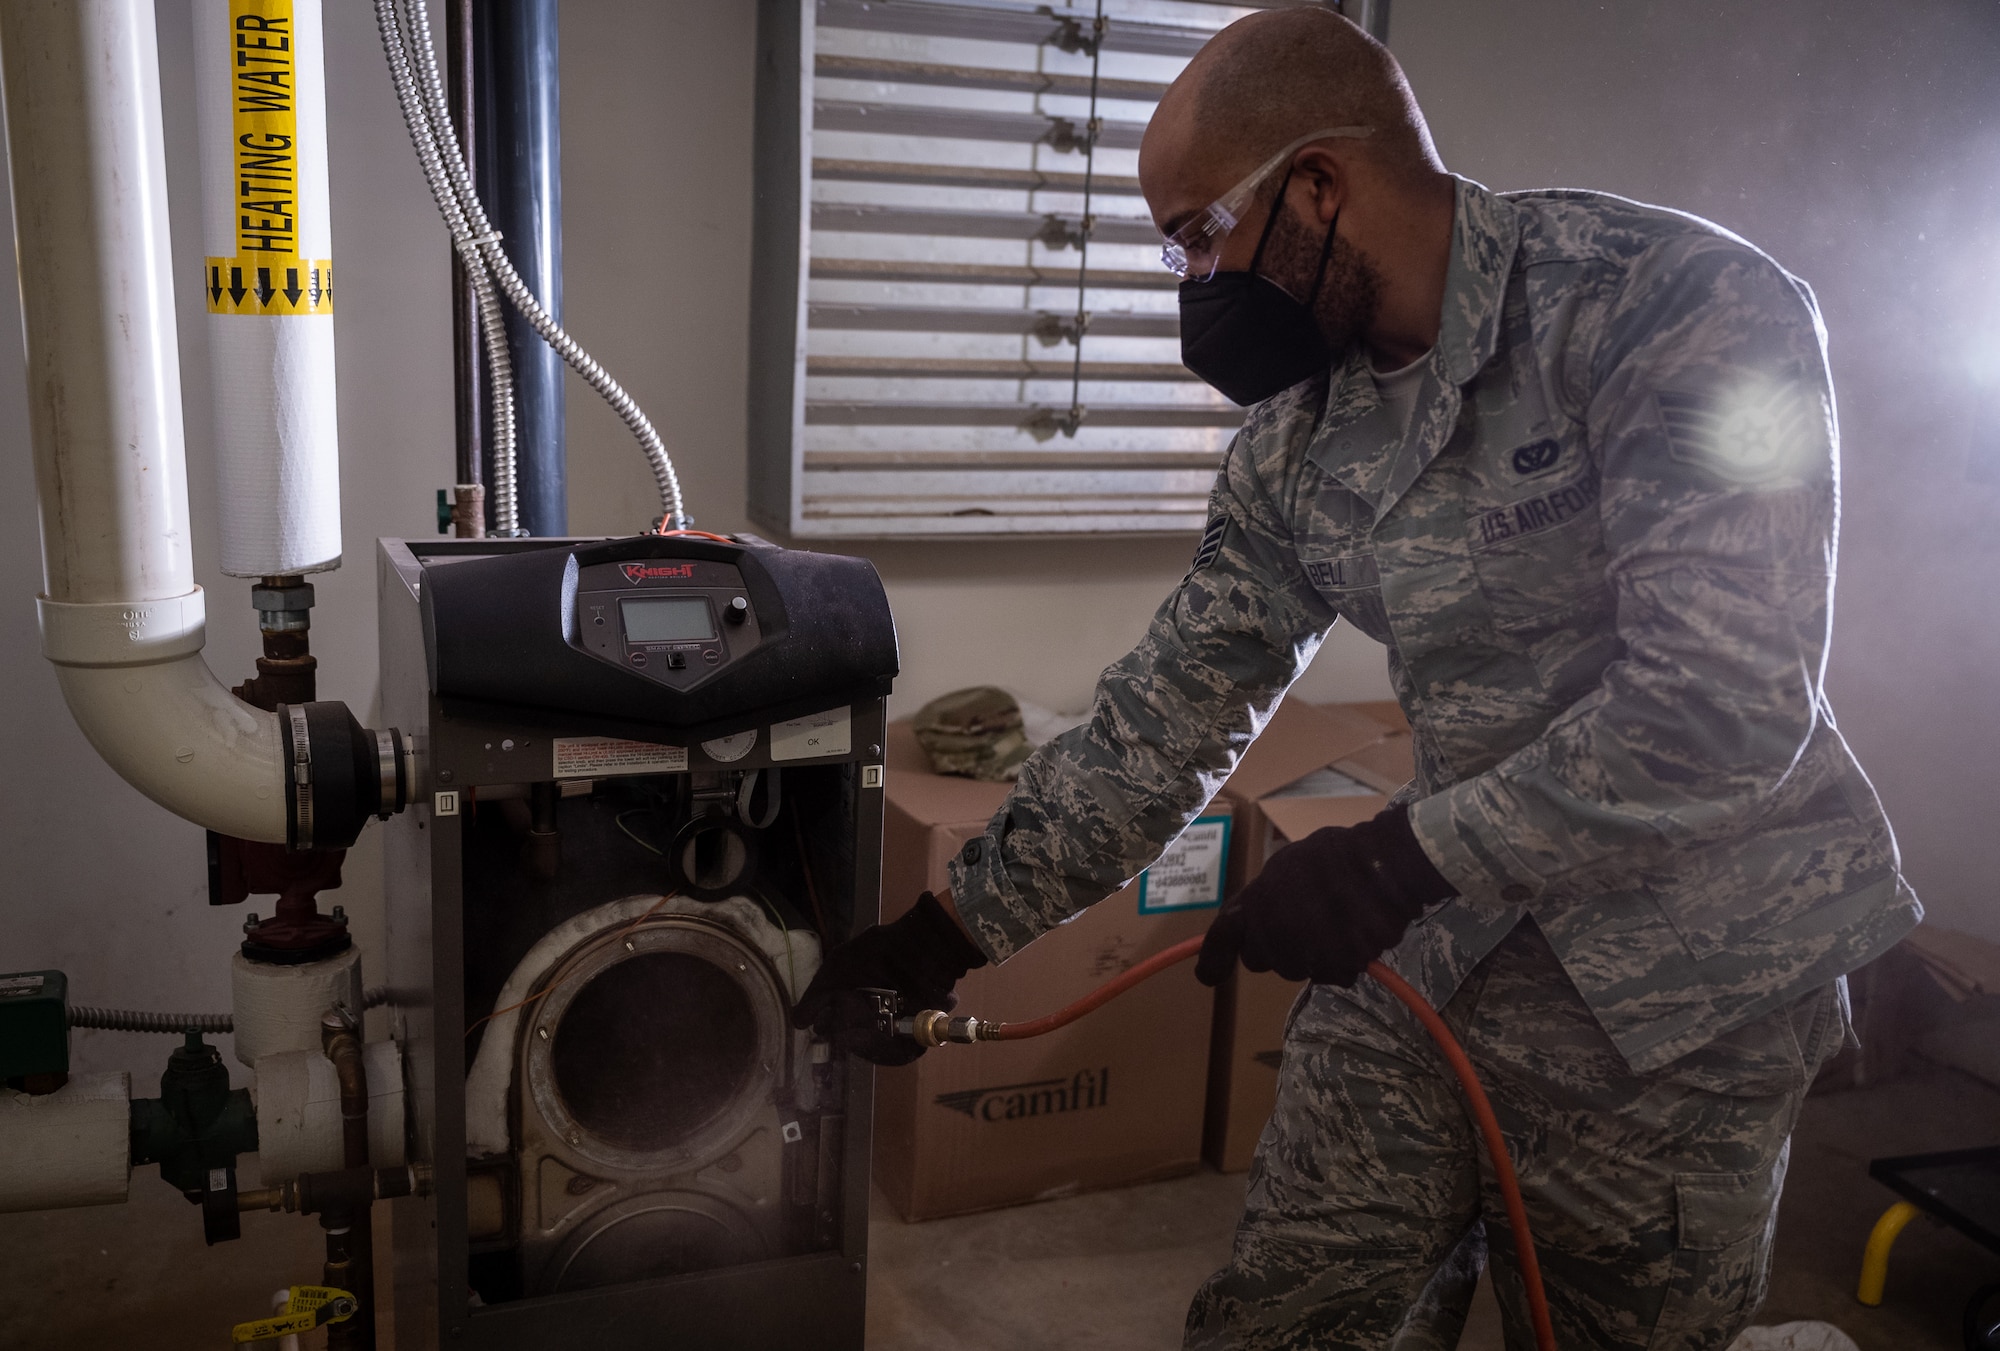 Staff Sgt. Keith Bell, 932nd Civil Engineer Squadron, heating, ventilation, and air conditioning craftsman cleans up the last of carbon buildup from a heating boiler using an air compressor February 5, 2021, inside building 3651, the 932nd Medical Group building, Scott Air Force Base, Illinois. (U.S. Air Force photo by Christopher Parr)